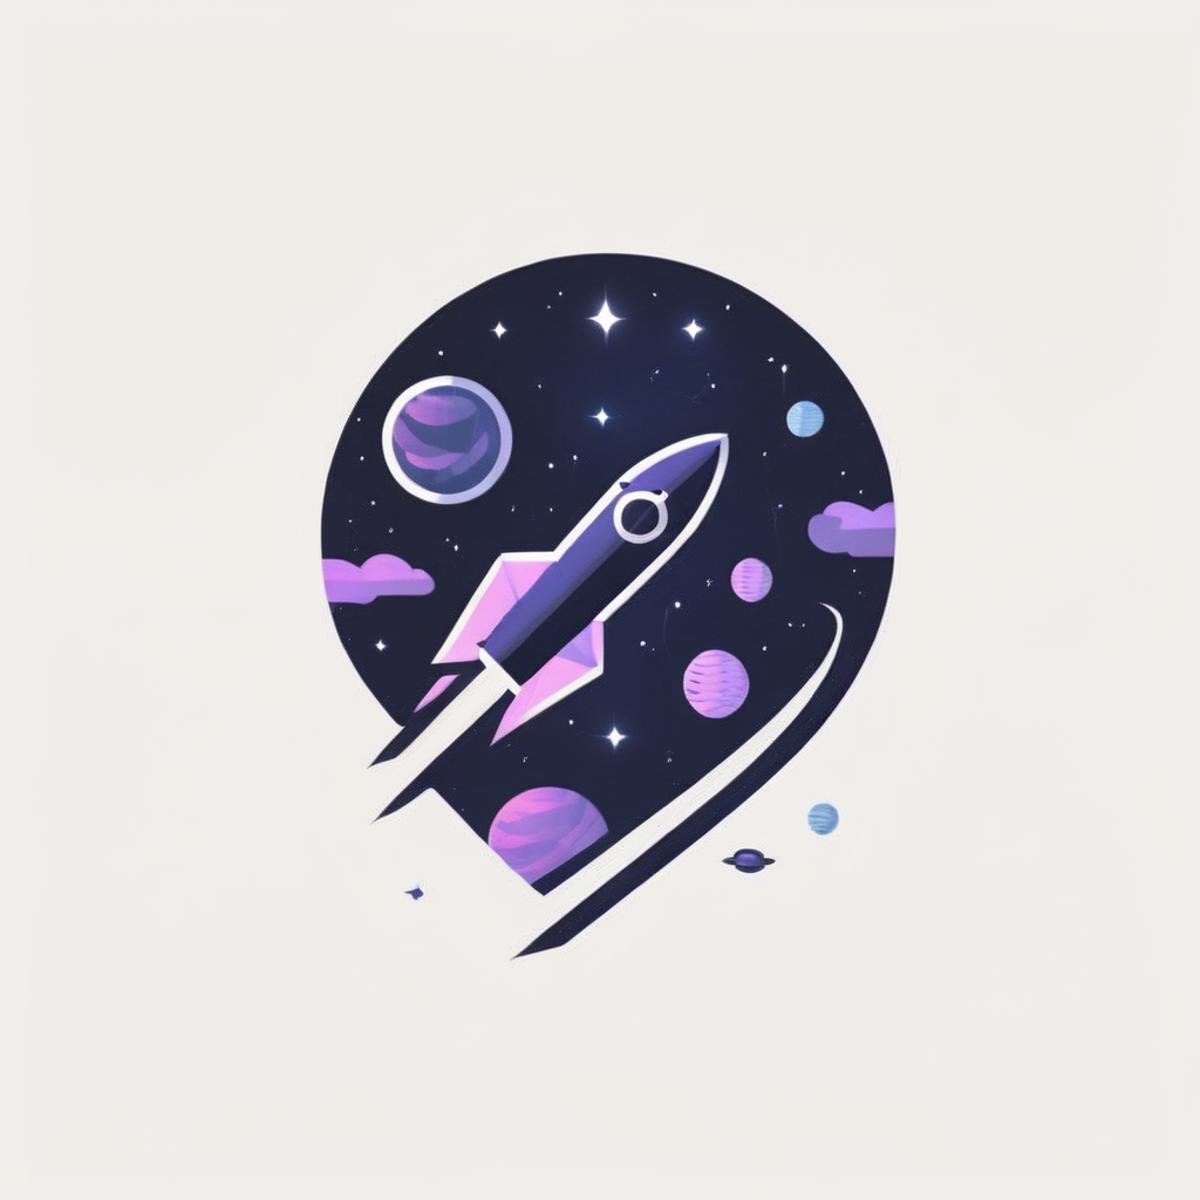 A Purple Space Theme with Planets, a Rocket Ship, and a Star.